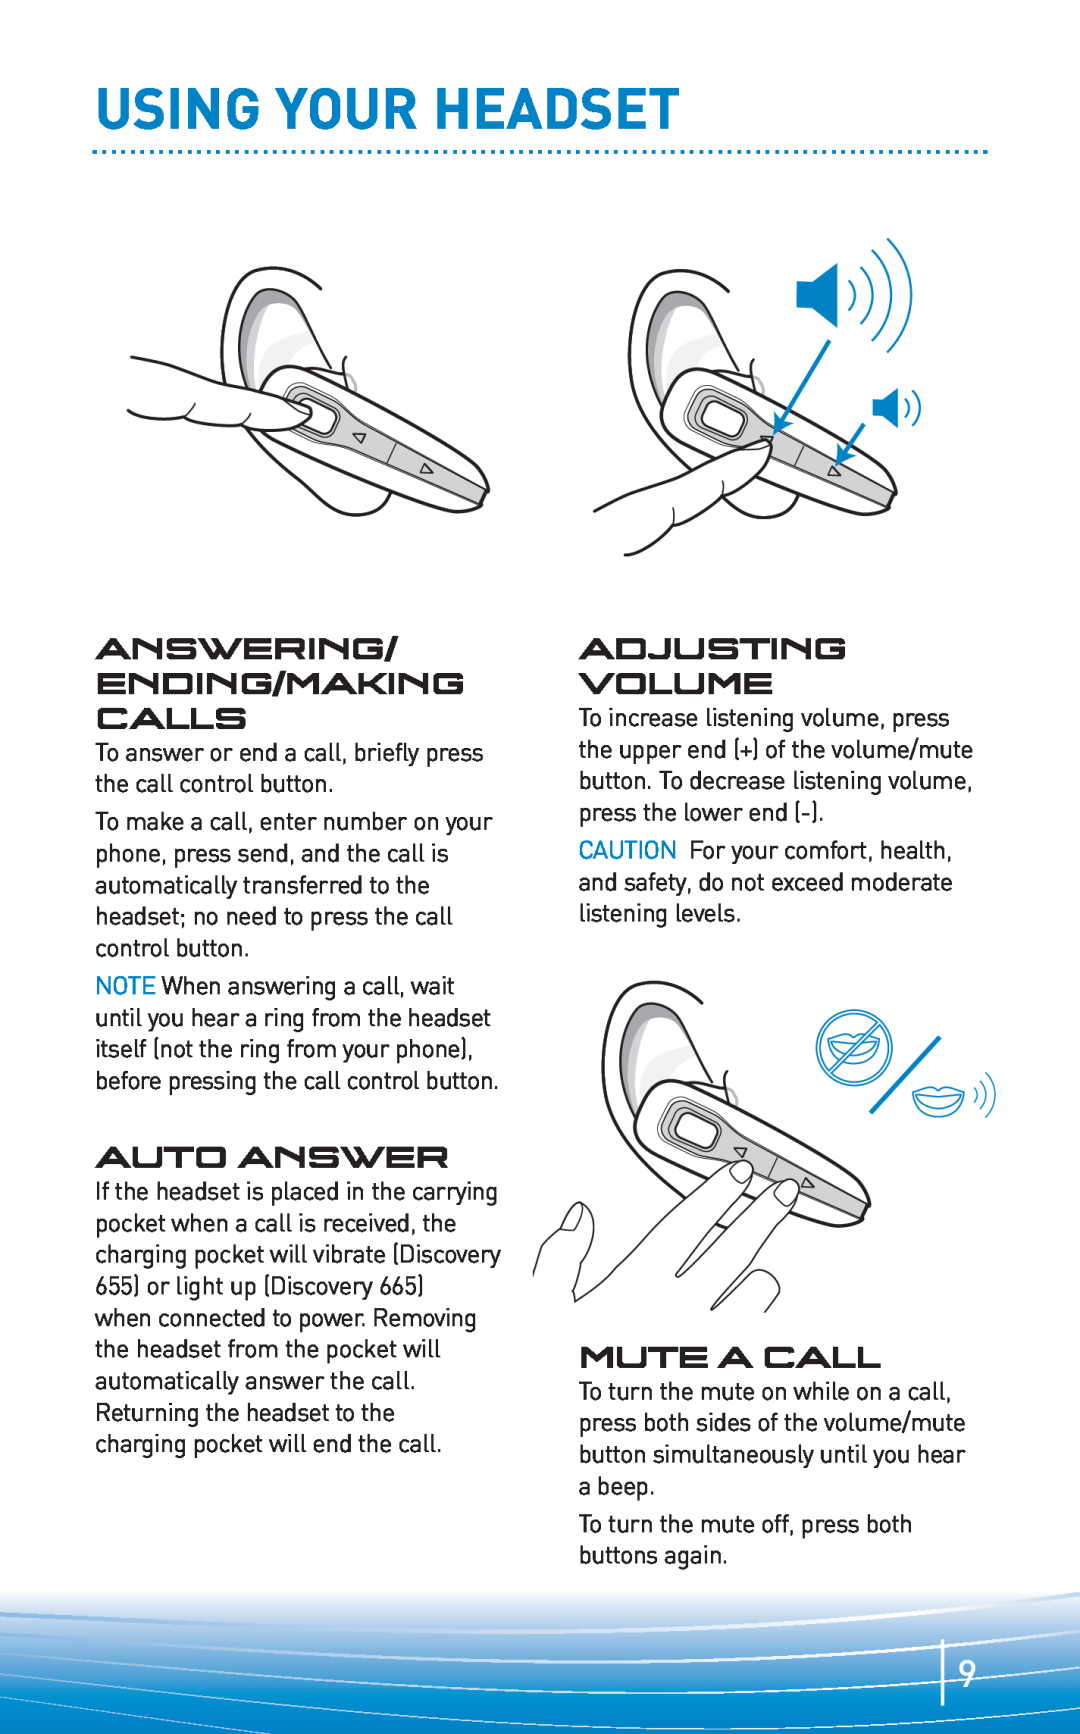 Plantronics 665, 655 manual Using Your Headset, Answering Ending/Making Calls, Auto Answer, Adjusting Volume, Muteacall 